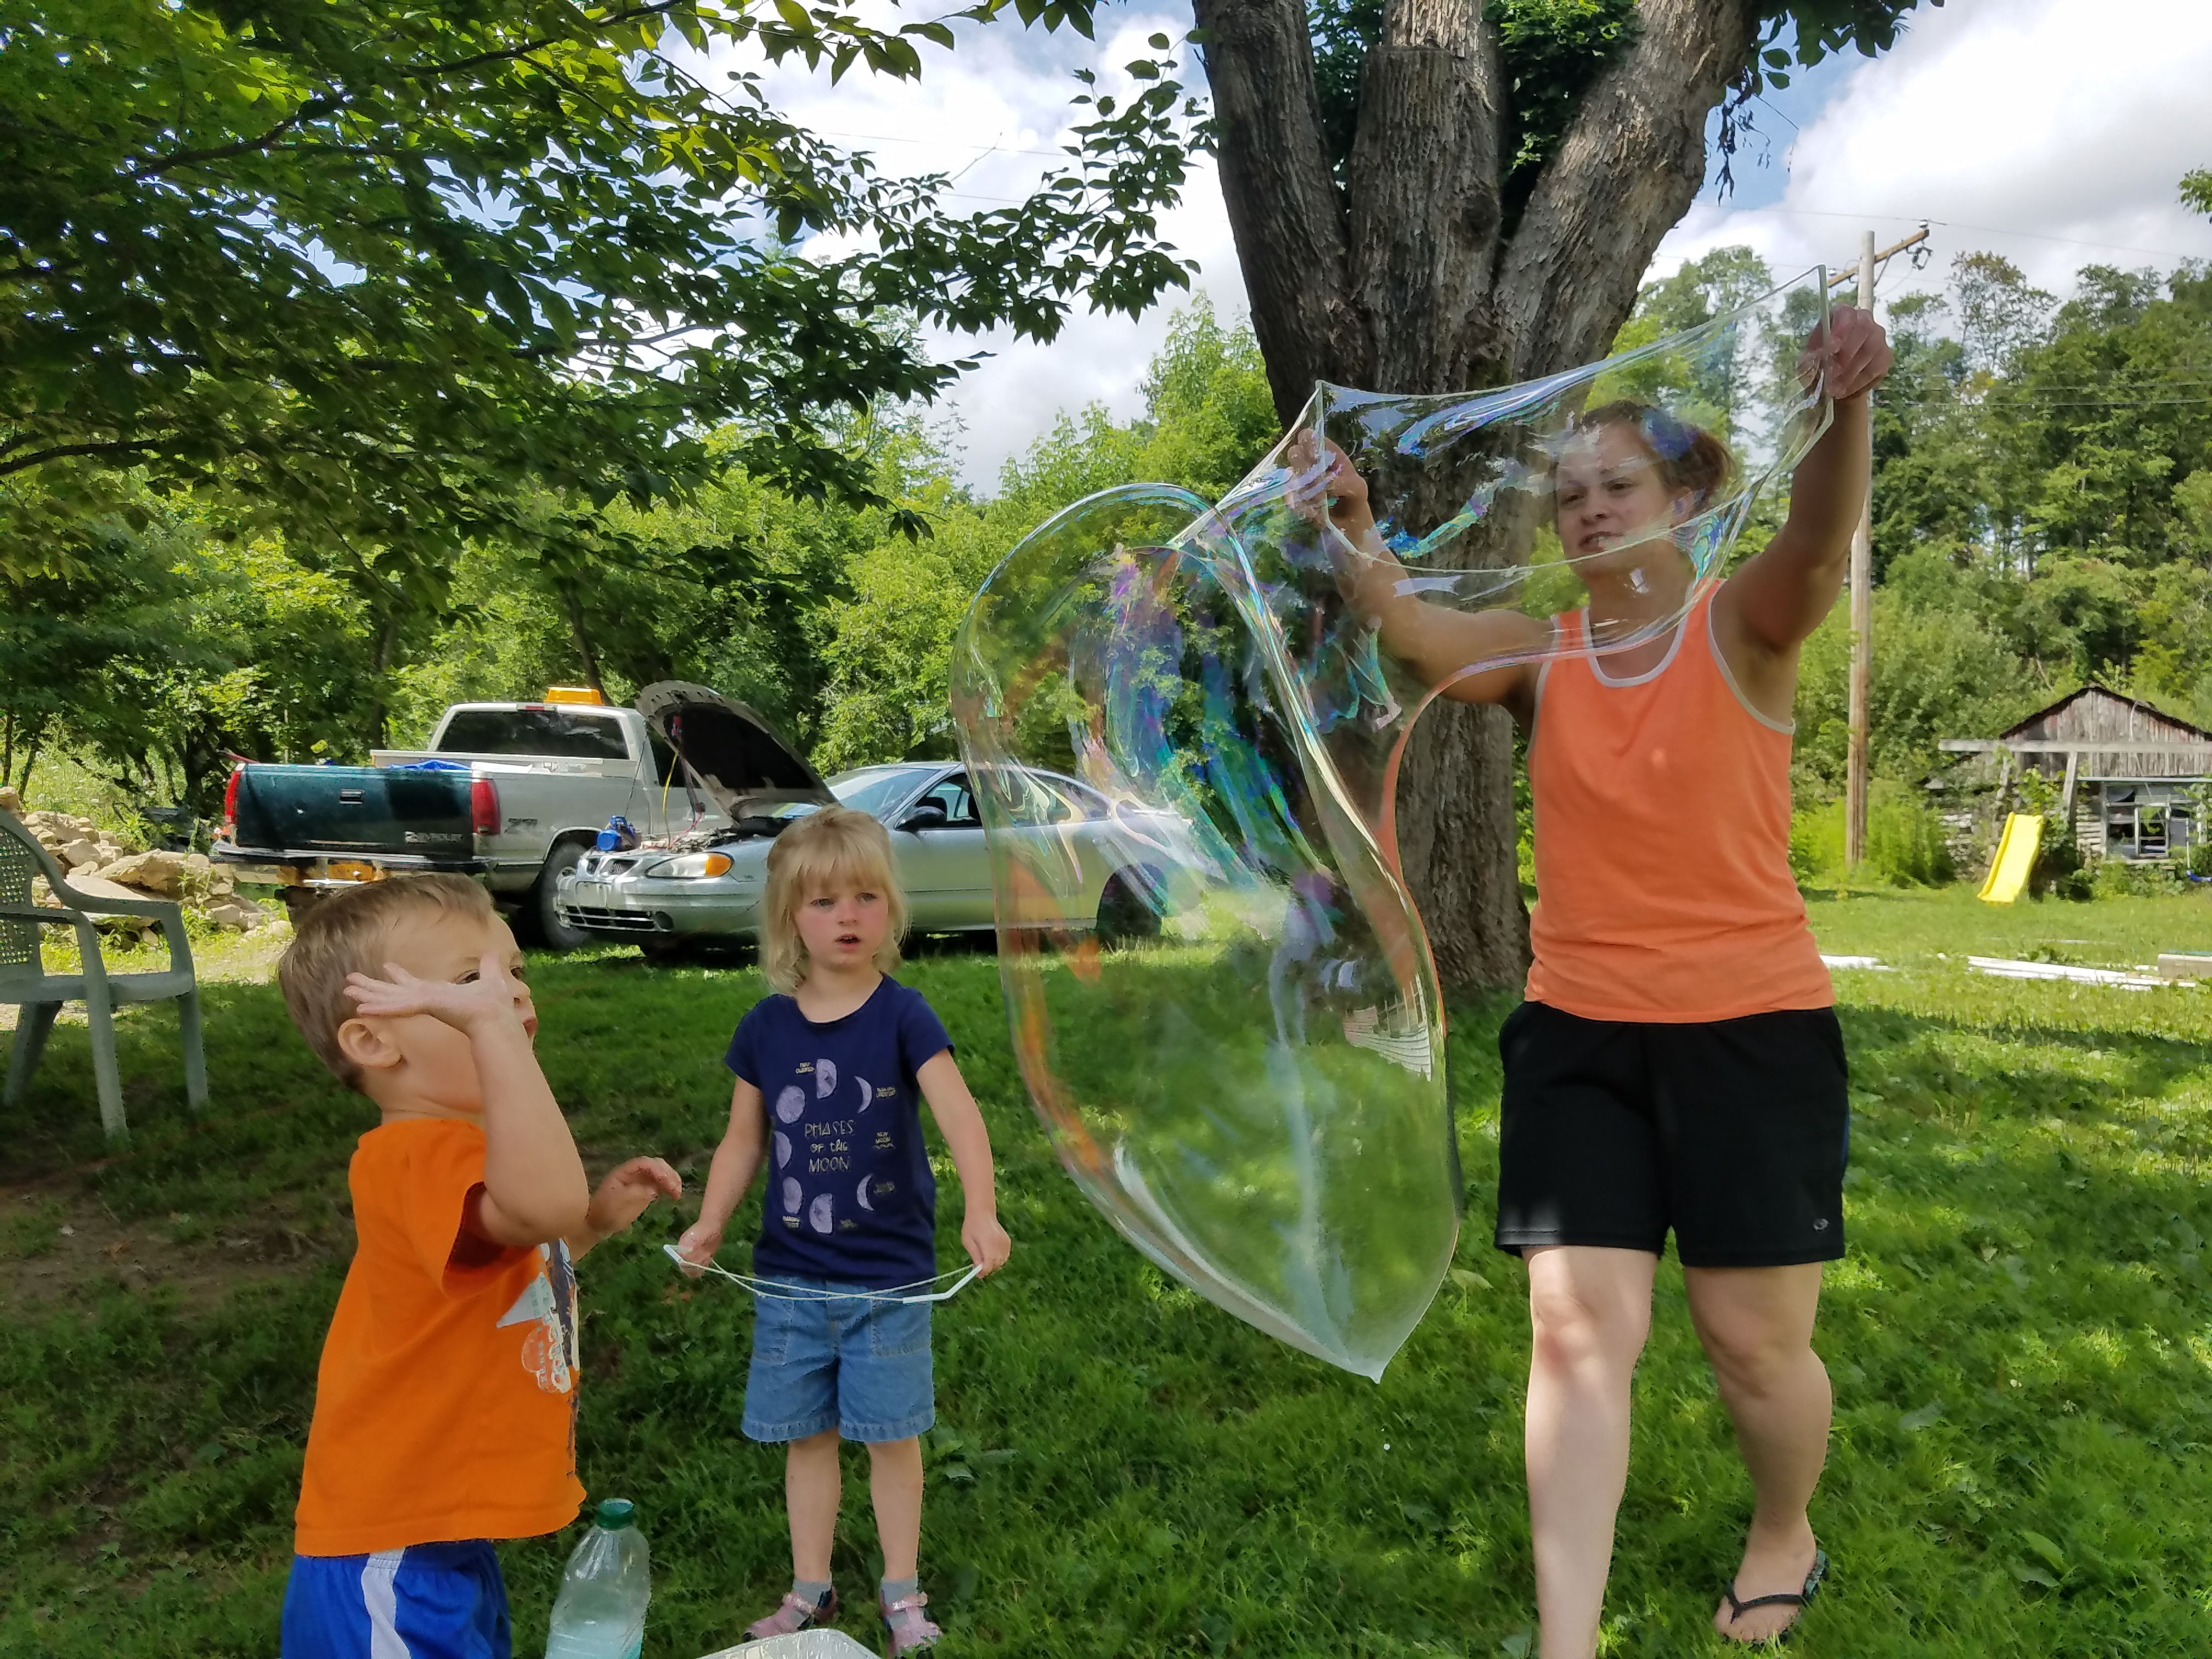 giant bubbles popping